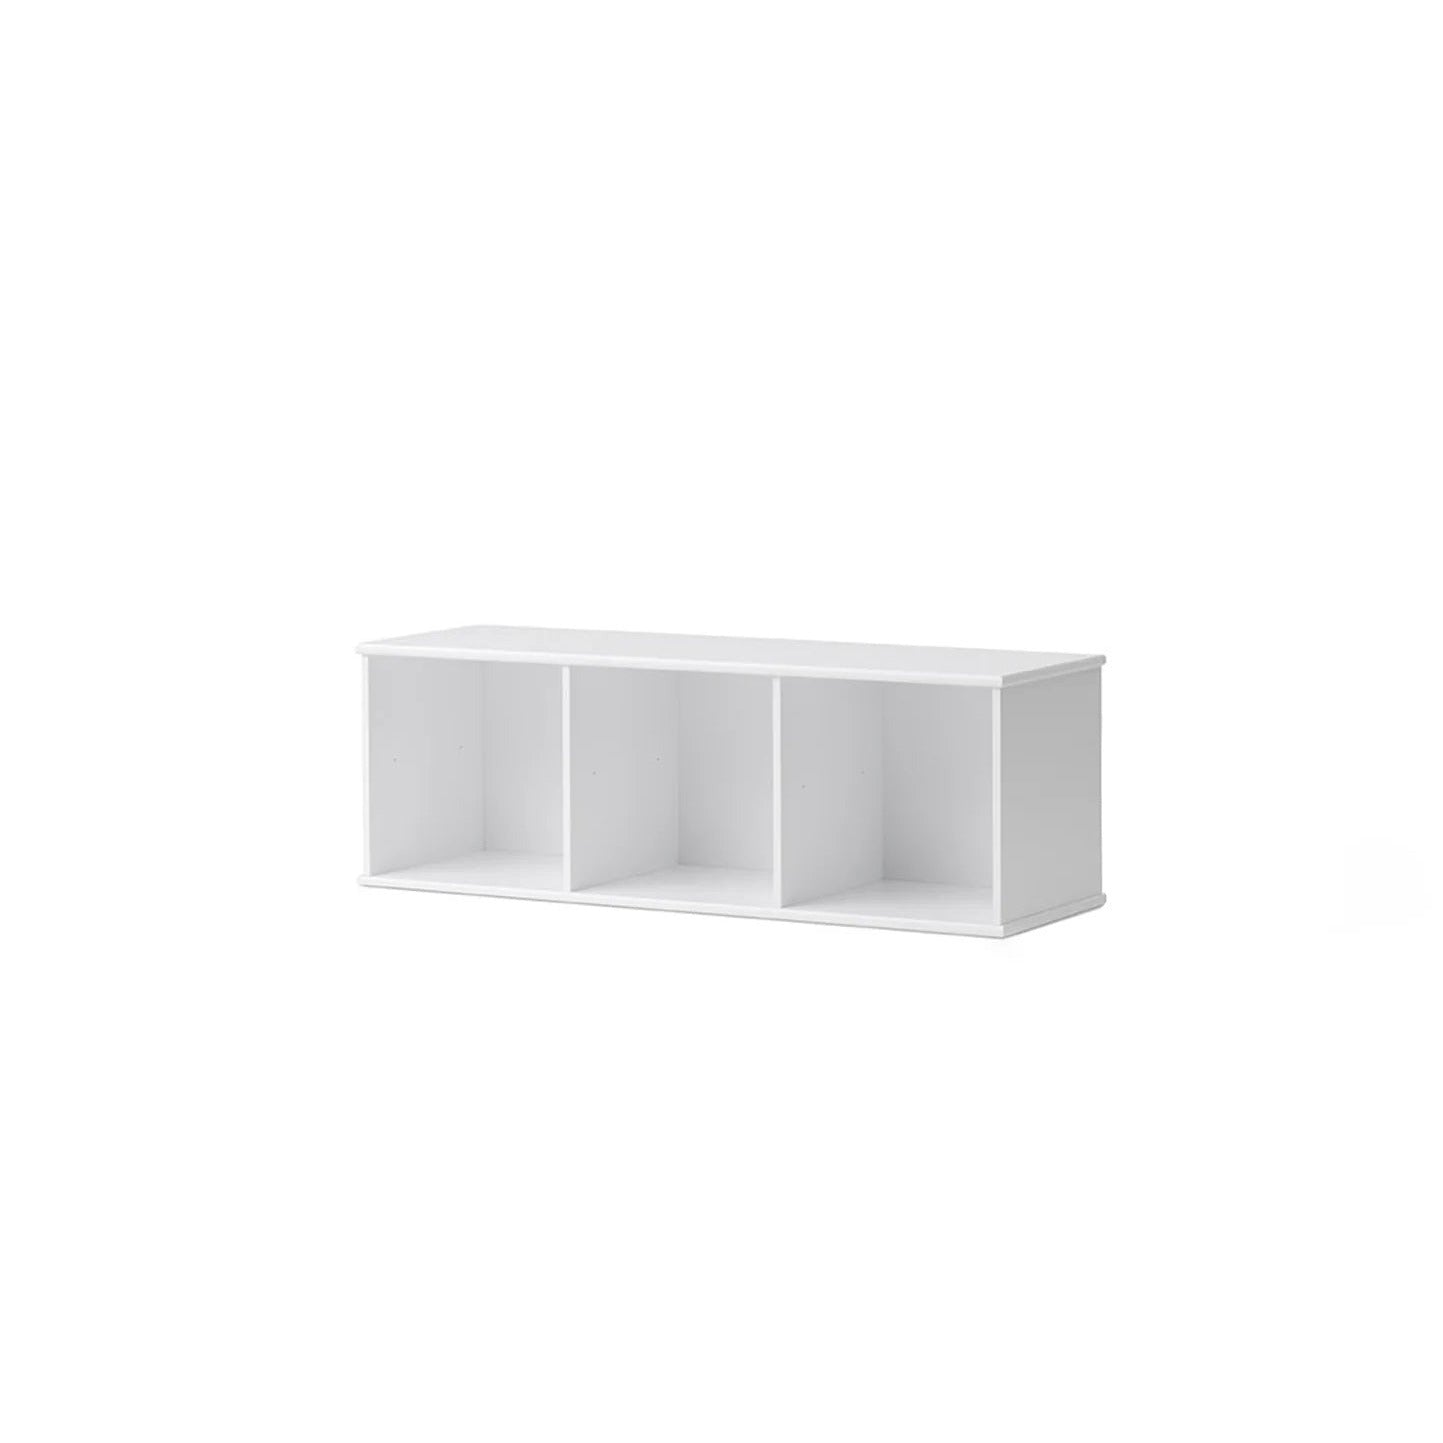 Oliver Furniture Wood Shelving Unit - 3 x 1 With Support